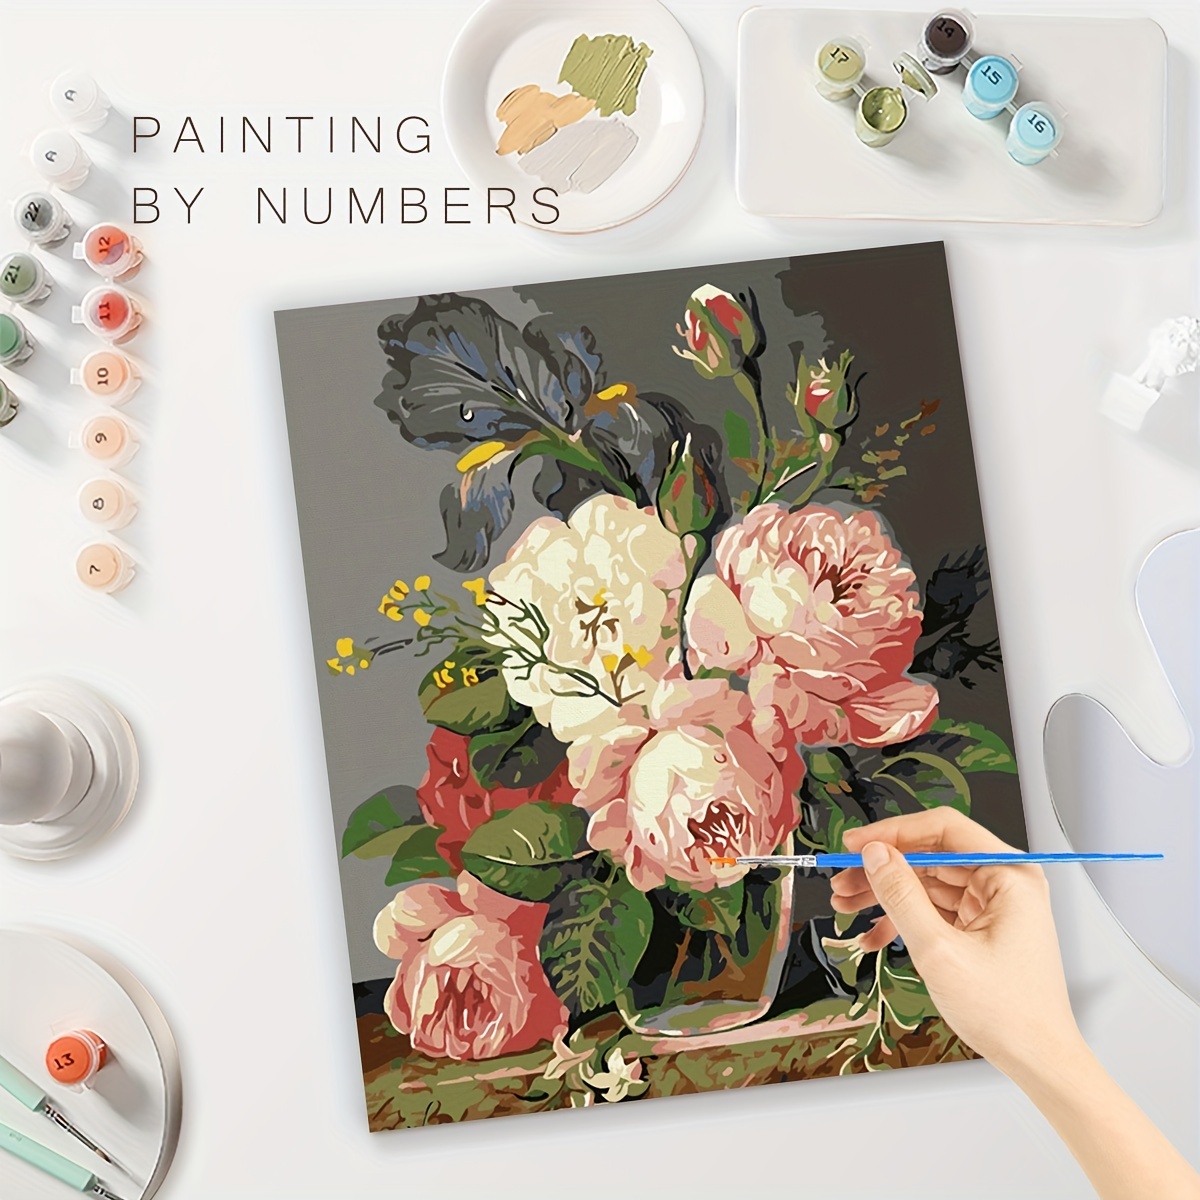 Judoit Paint By Number For Adults Beginner, Diy Painting By